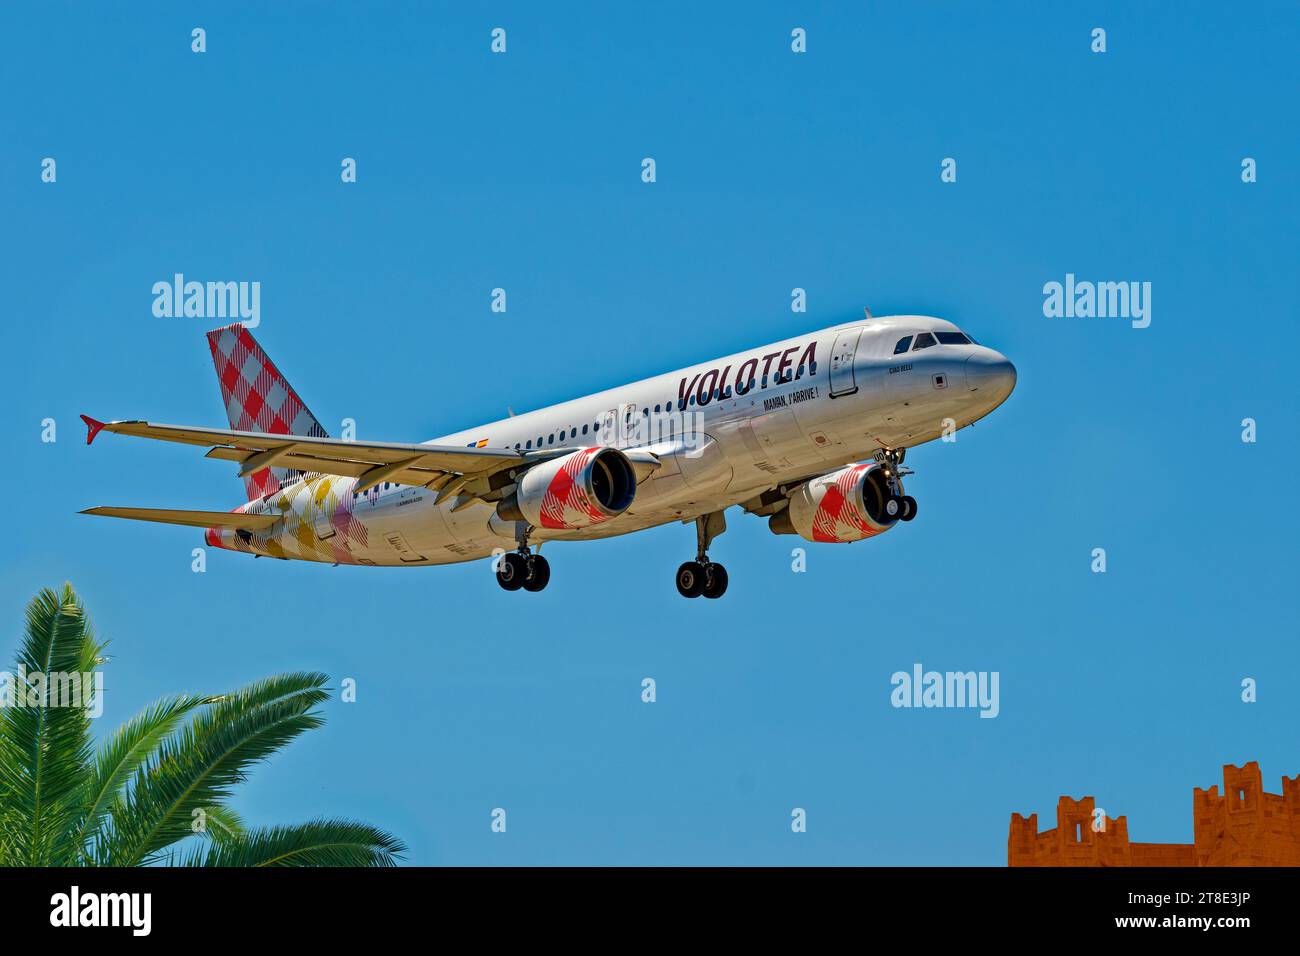 Volotea spanish budget airline plane Airbus A320-200 landing. Stock Photo